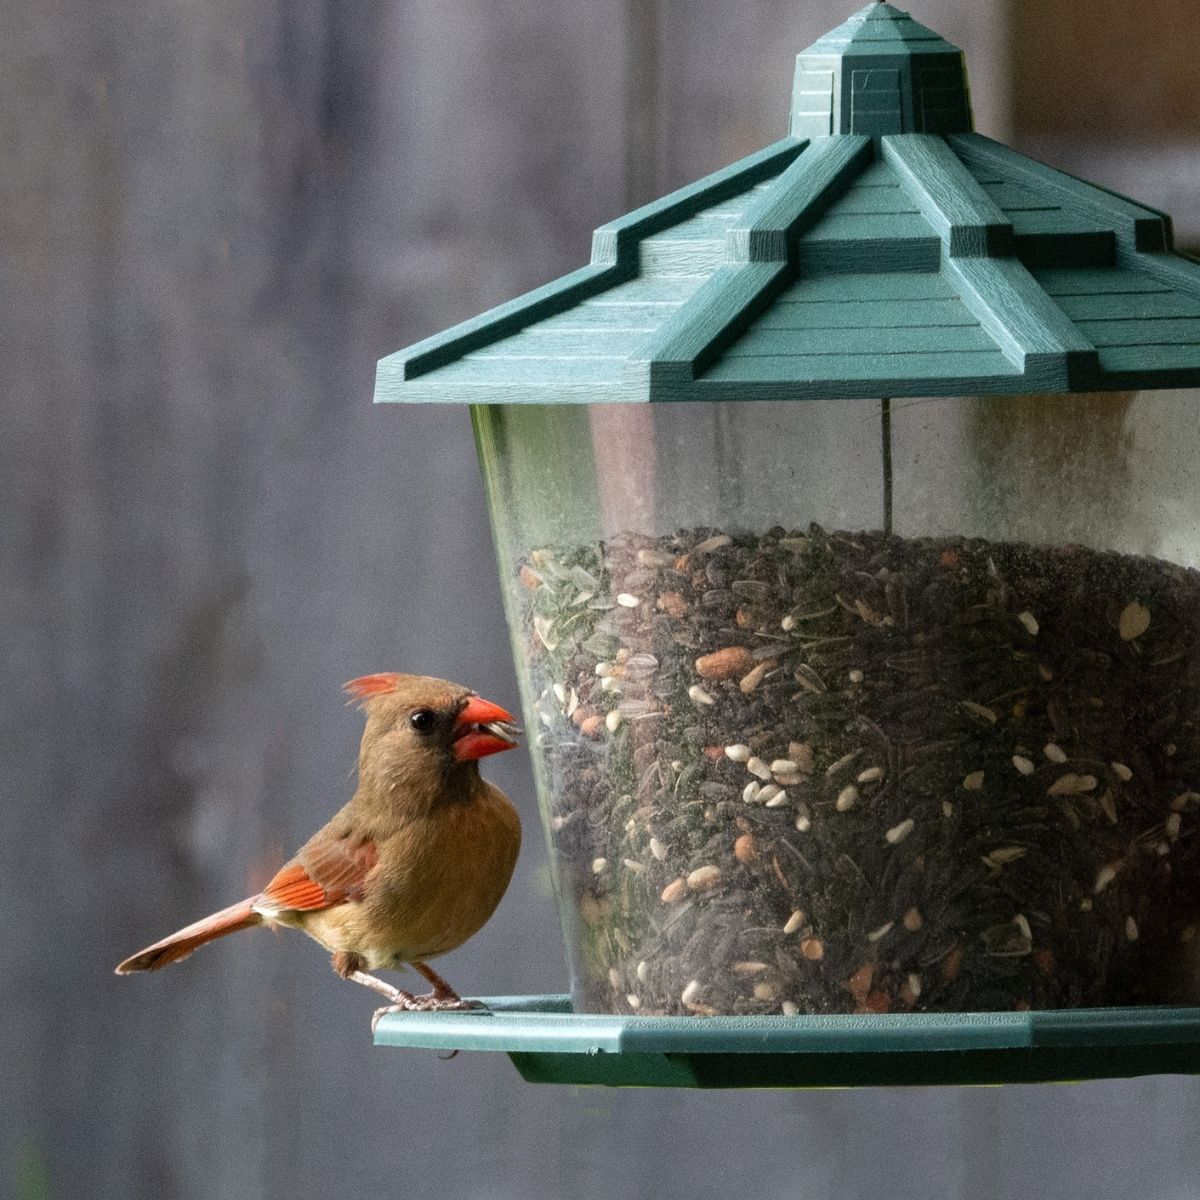 female cardinal perched on a feeder with sunflower seeds